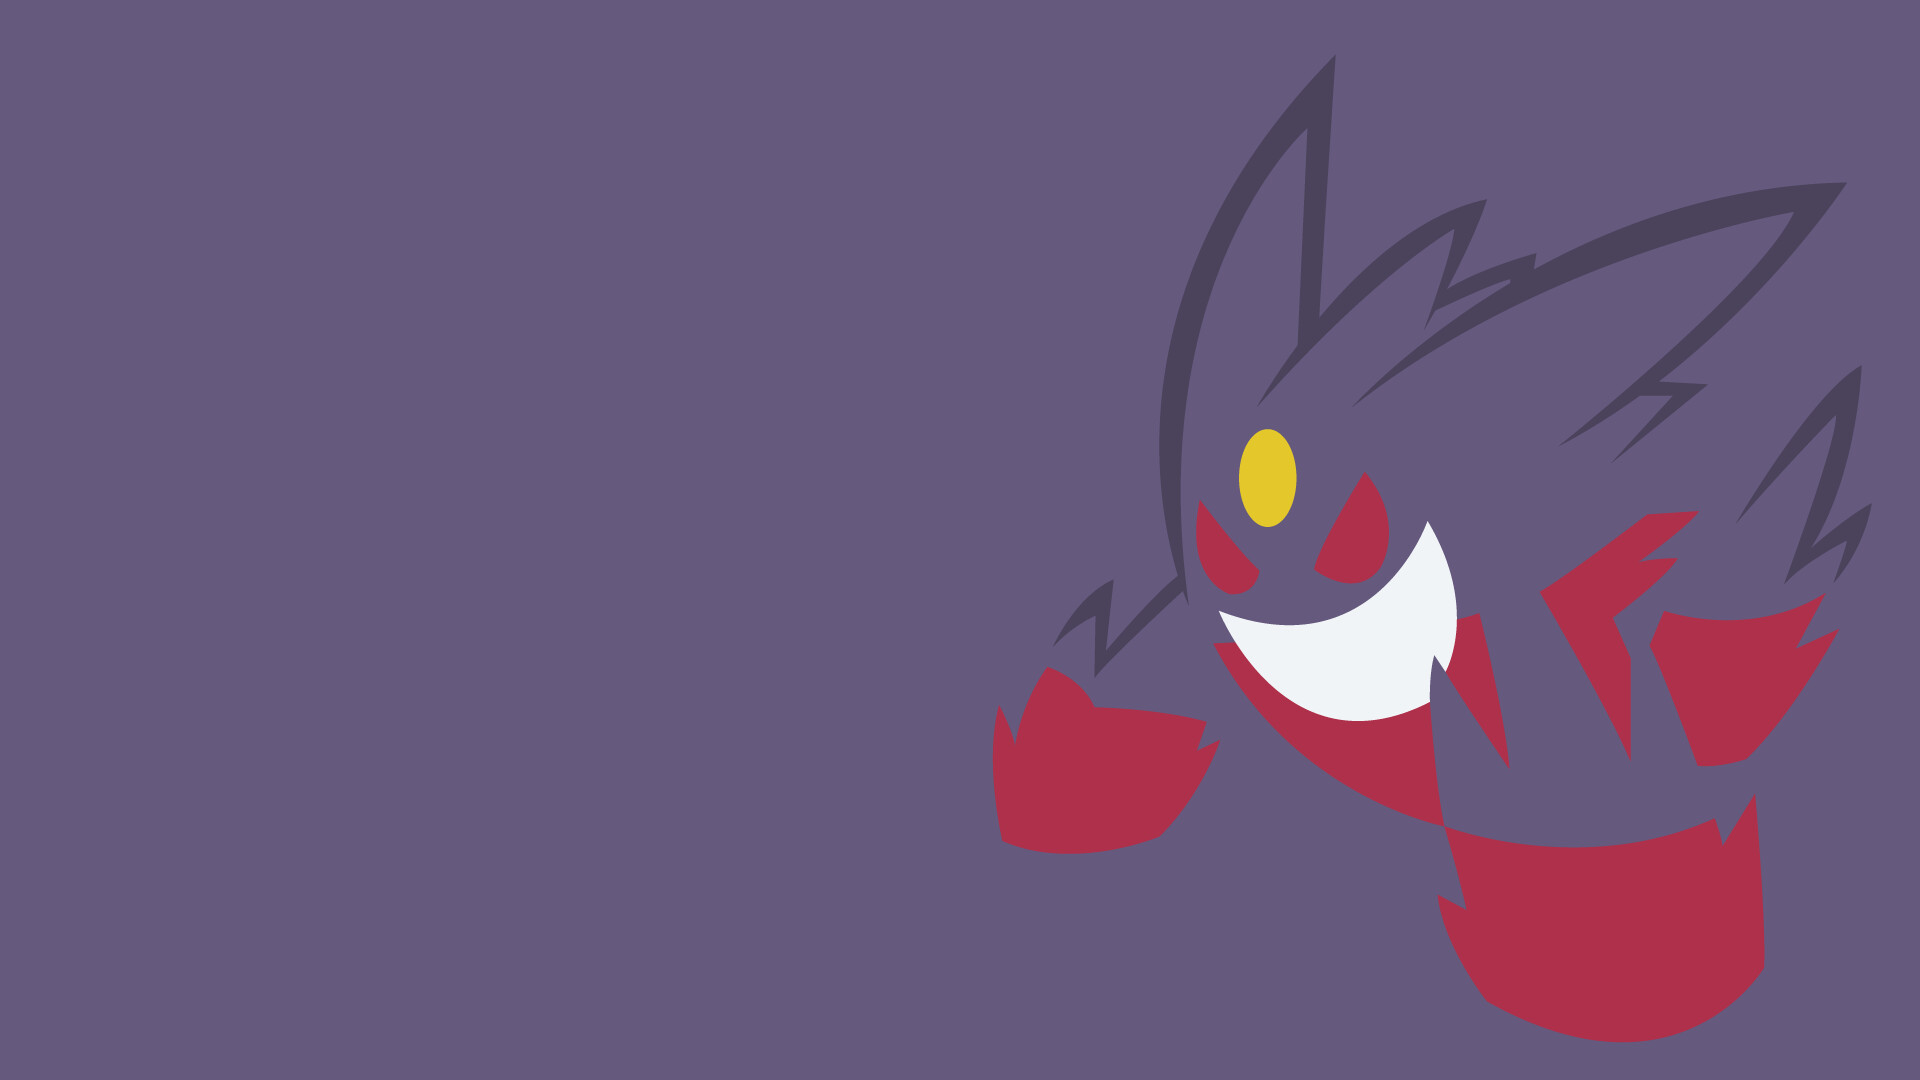 Gengar: A reddish-purple portion of the body sinking into the ground, A third oval eye appears on the forehead. 1920x1080 Full HD Wallpaper.